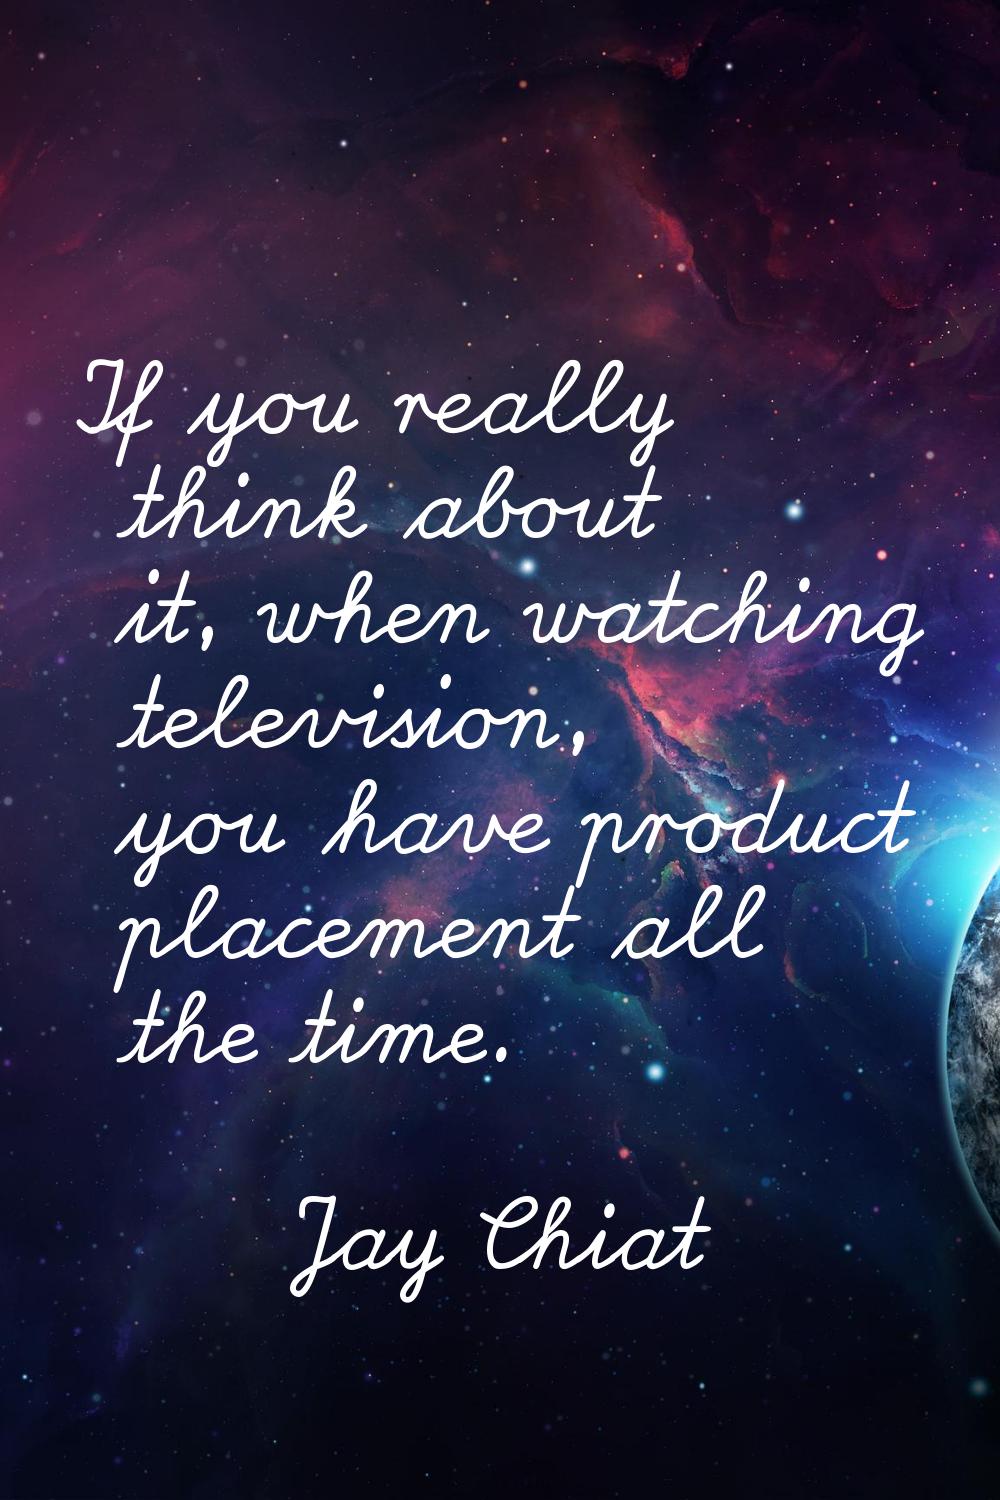 If you really think about it, when watching television, you have product placement all the time.